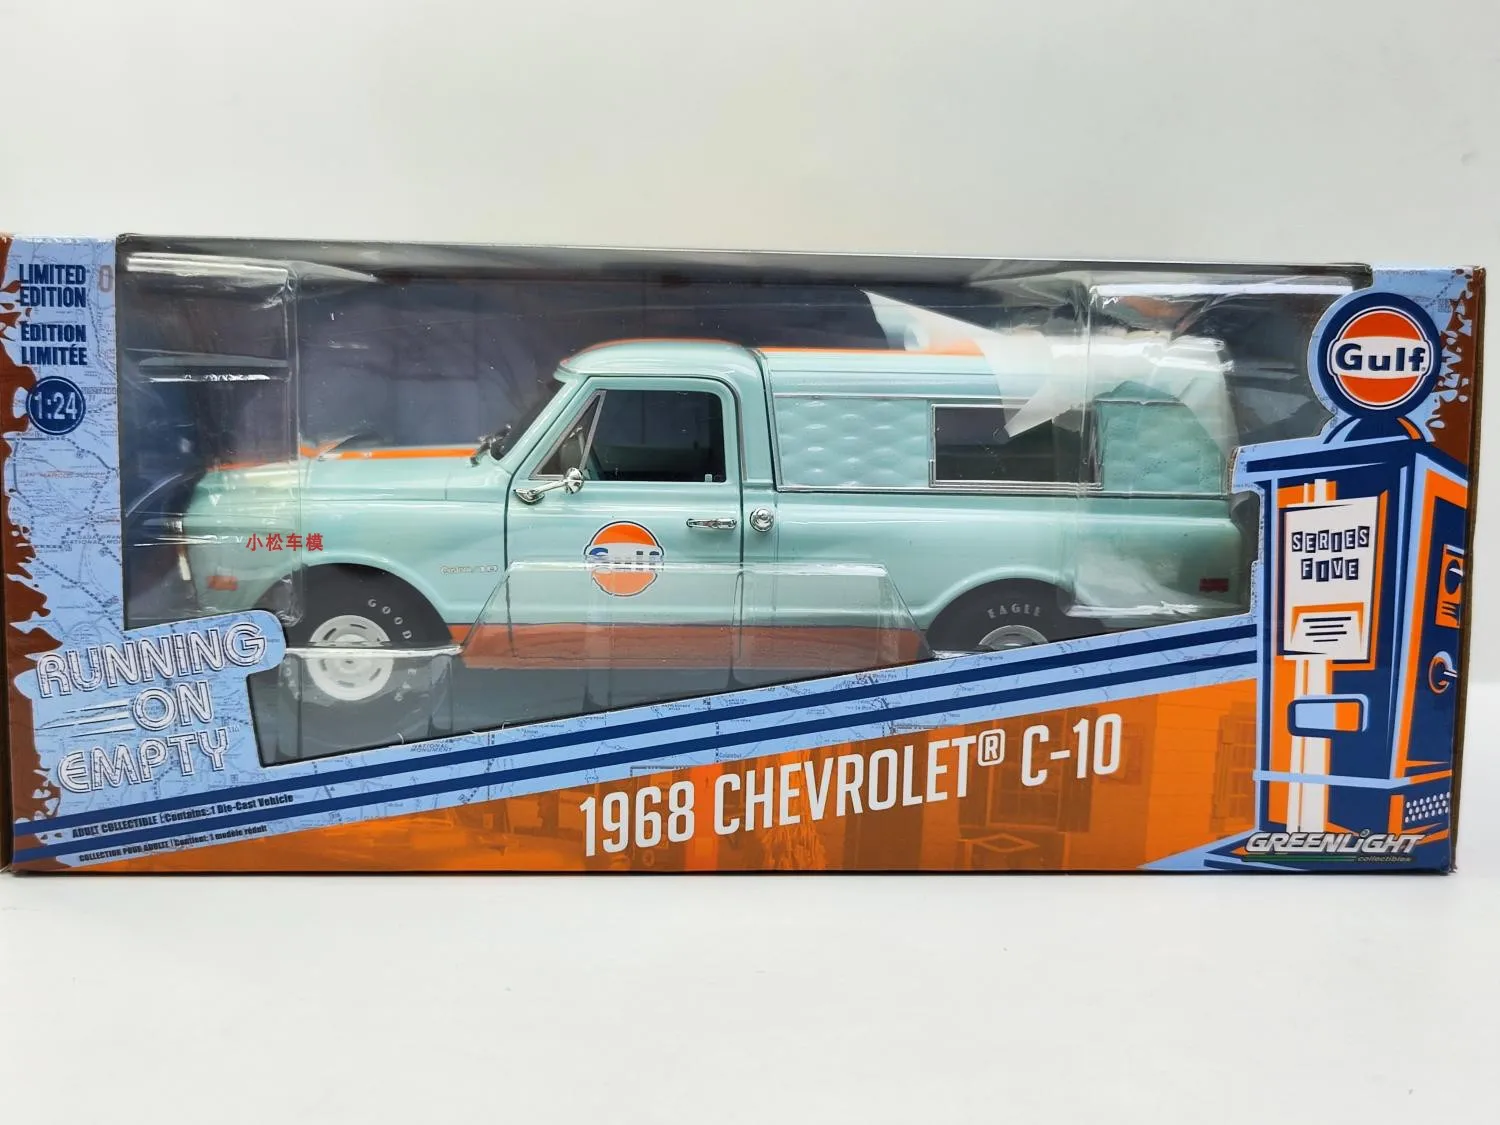 

1:24 1968 Chevrolet C-10 High Simulation Alloy Car Model Collectible Toy Gift Souvenir Display Ornament